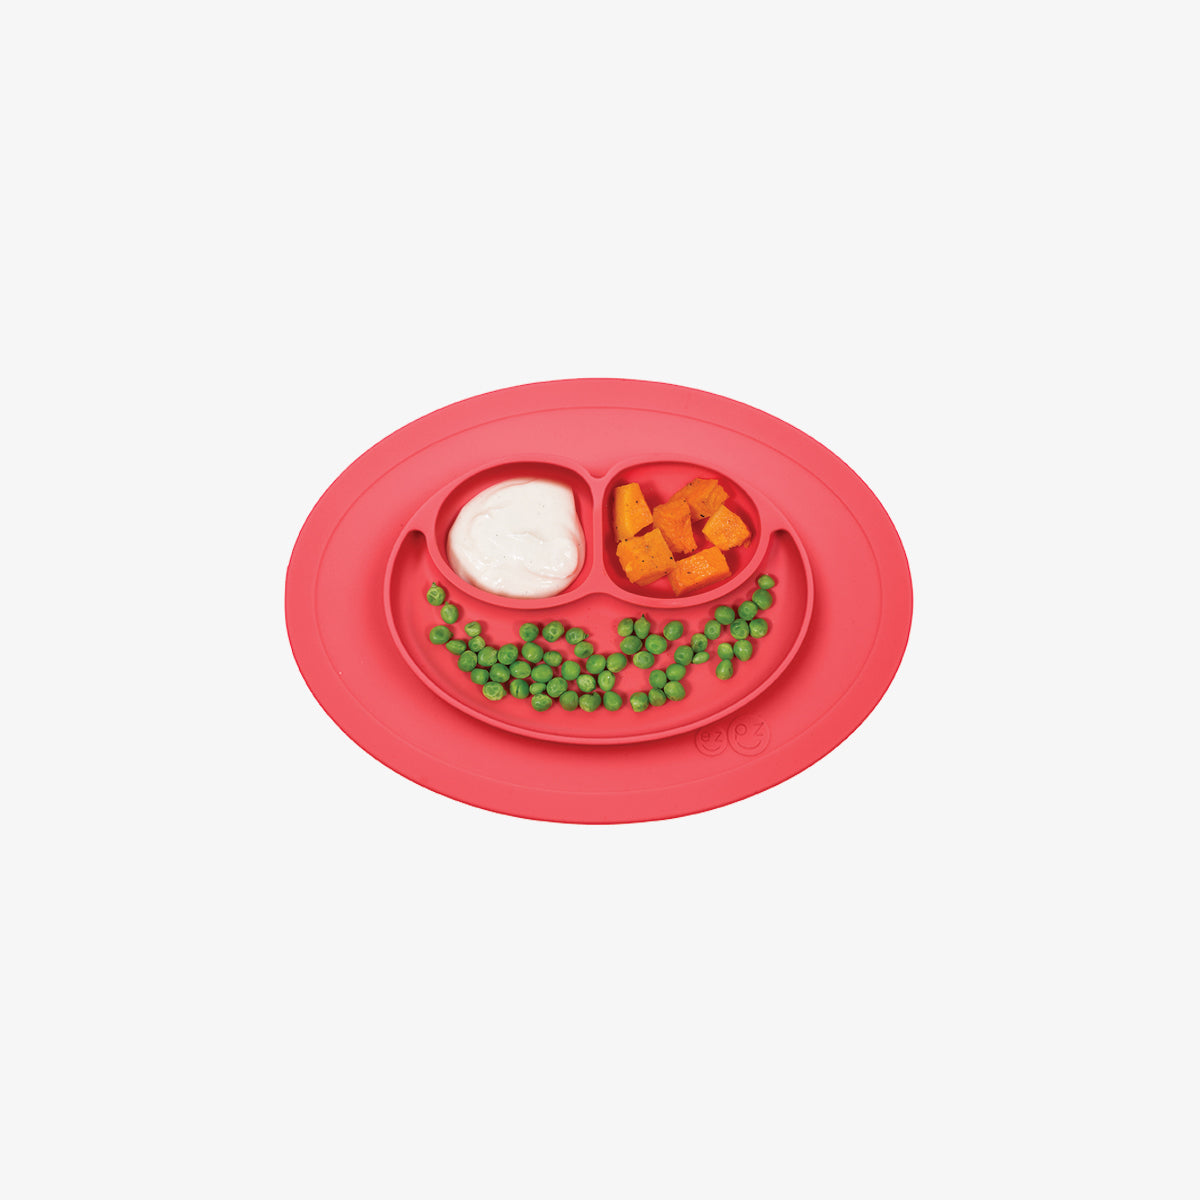 The Mini Mat in Coral by ezpz / Self-Suctioning Silicone Plate + Placemat